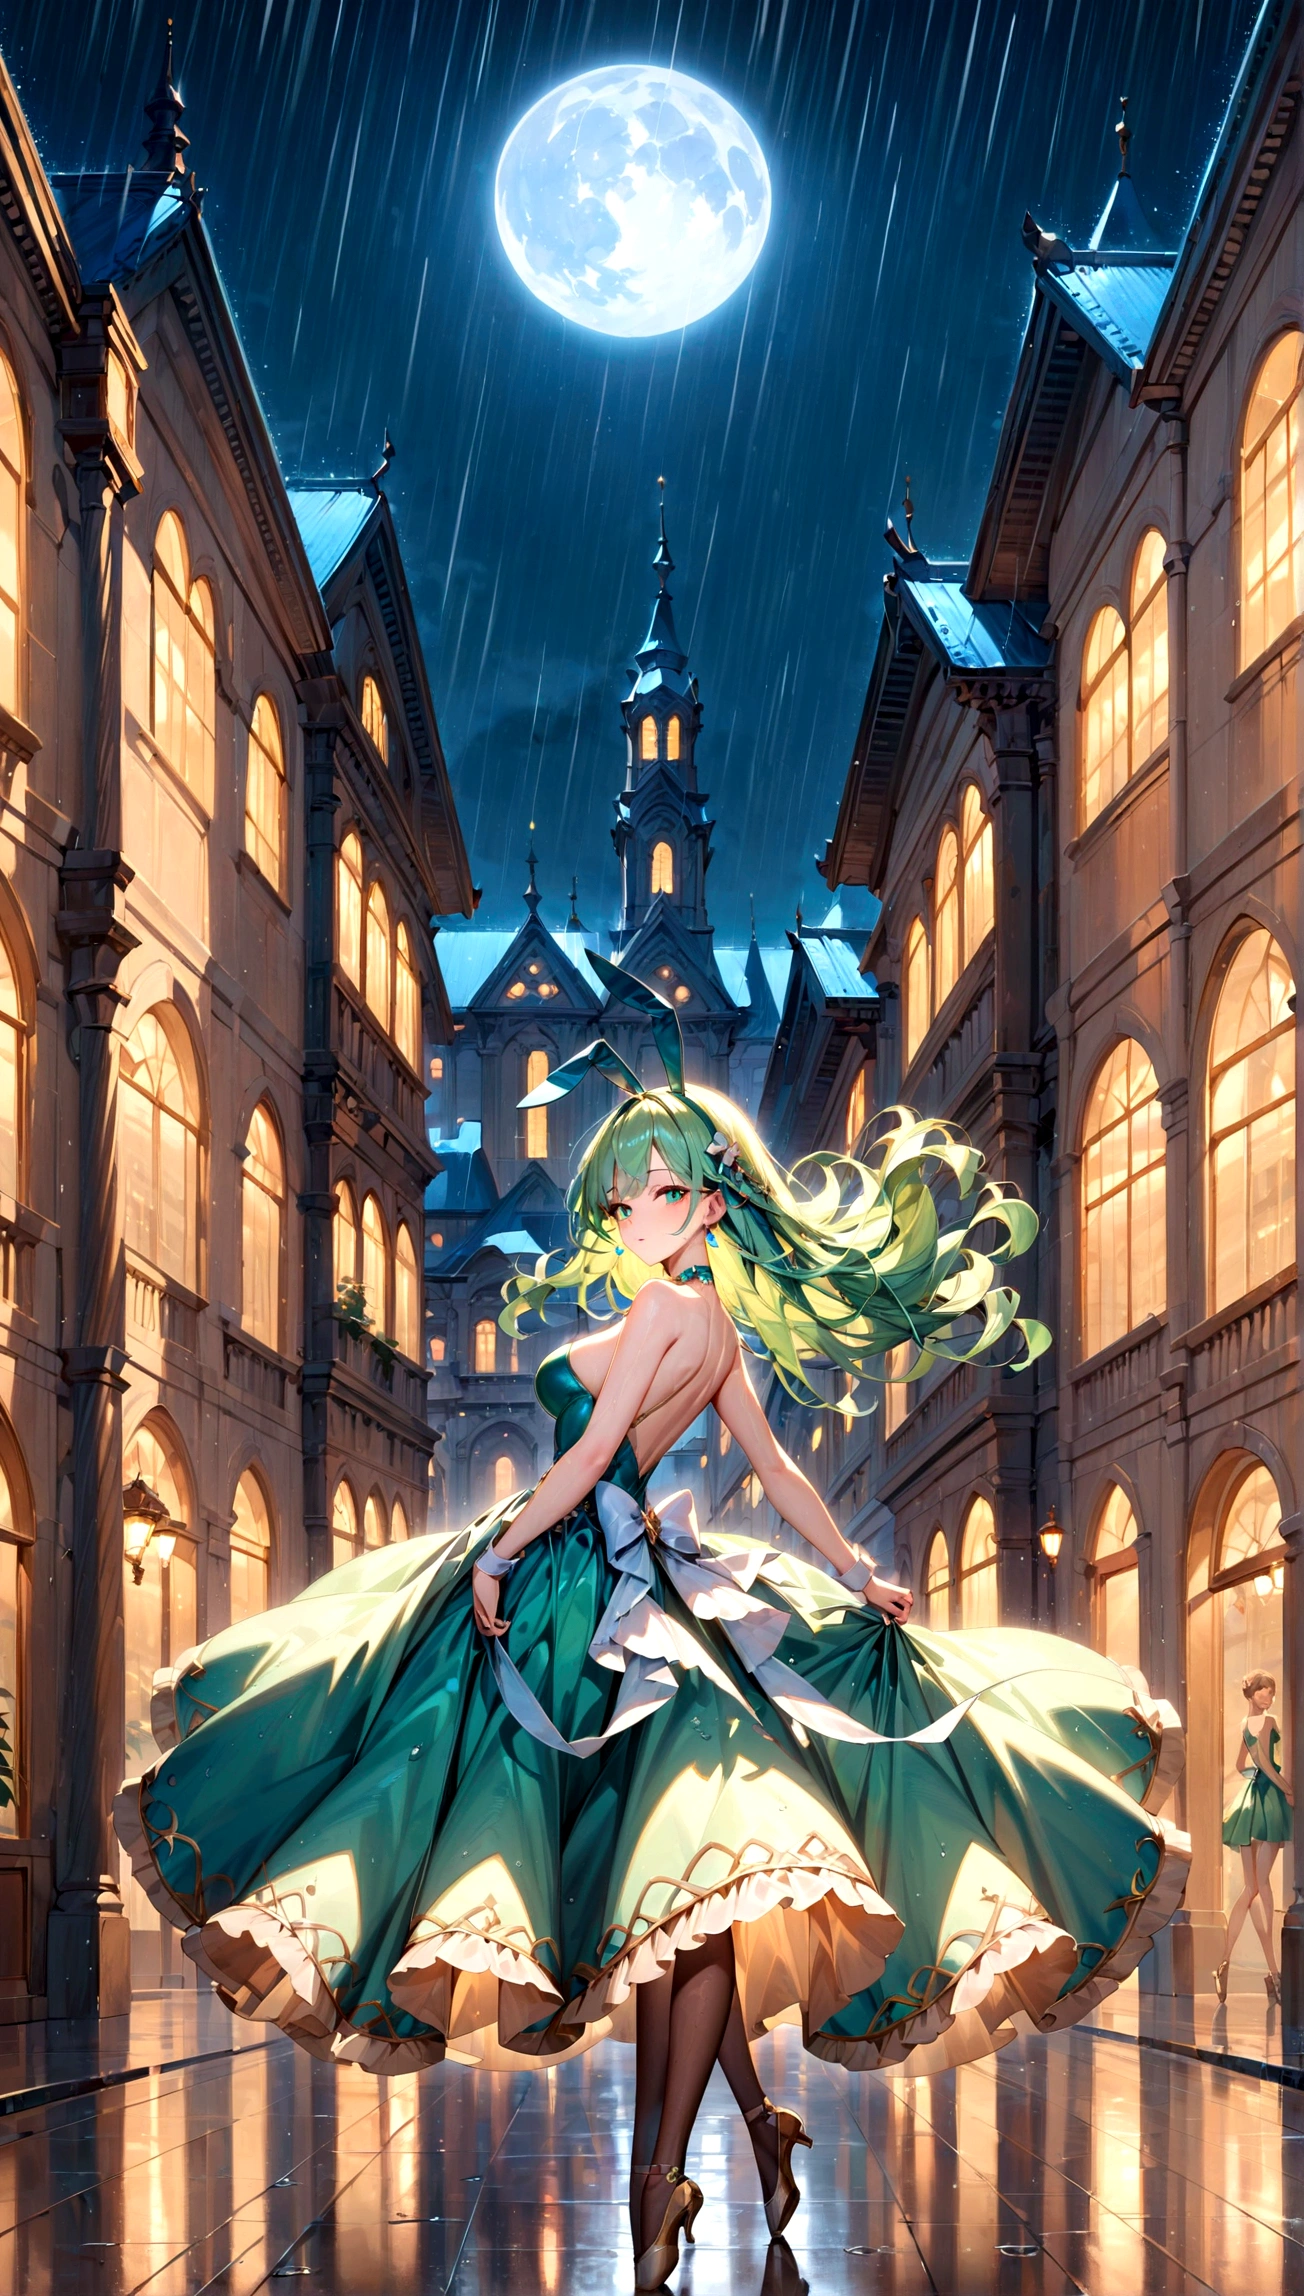 score_9, score_8_up, score_7_up, score_6_up, masterpiece, top quality, best quality, official art, beautiful and aesthetic, anime_source, centered, cinematic shot, view from above, 1girl, bunny ears, blue flowing hair, ballerina, green dress, hair accessories, dancing in the rain, city street, night, full moon, volumetric lighting, cold color, epic composition, epic proportion, 8KExpressiveh, Ultra HD, 4k image